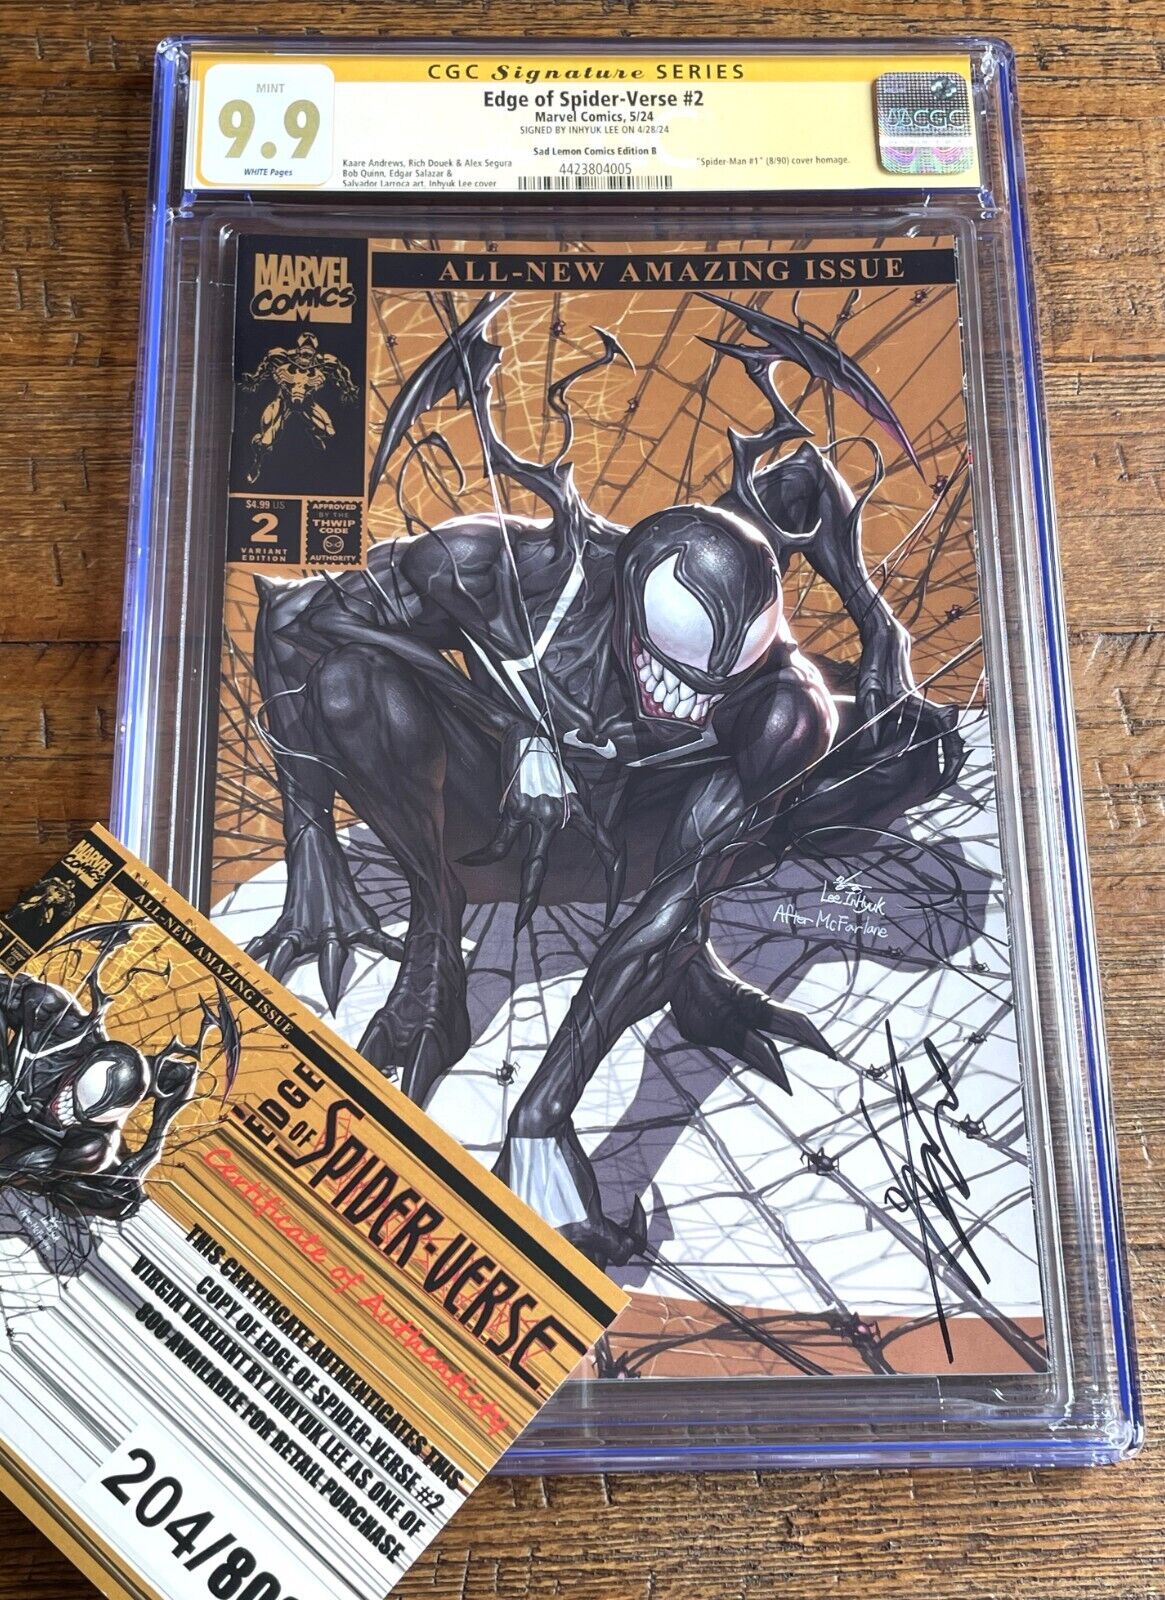 EDGE OF SPIDER-VERSE #2 CGC SS 9.9 INHYUK LEE SIGNED GOLD VARIANT-B NOT 9.8 WOW